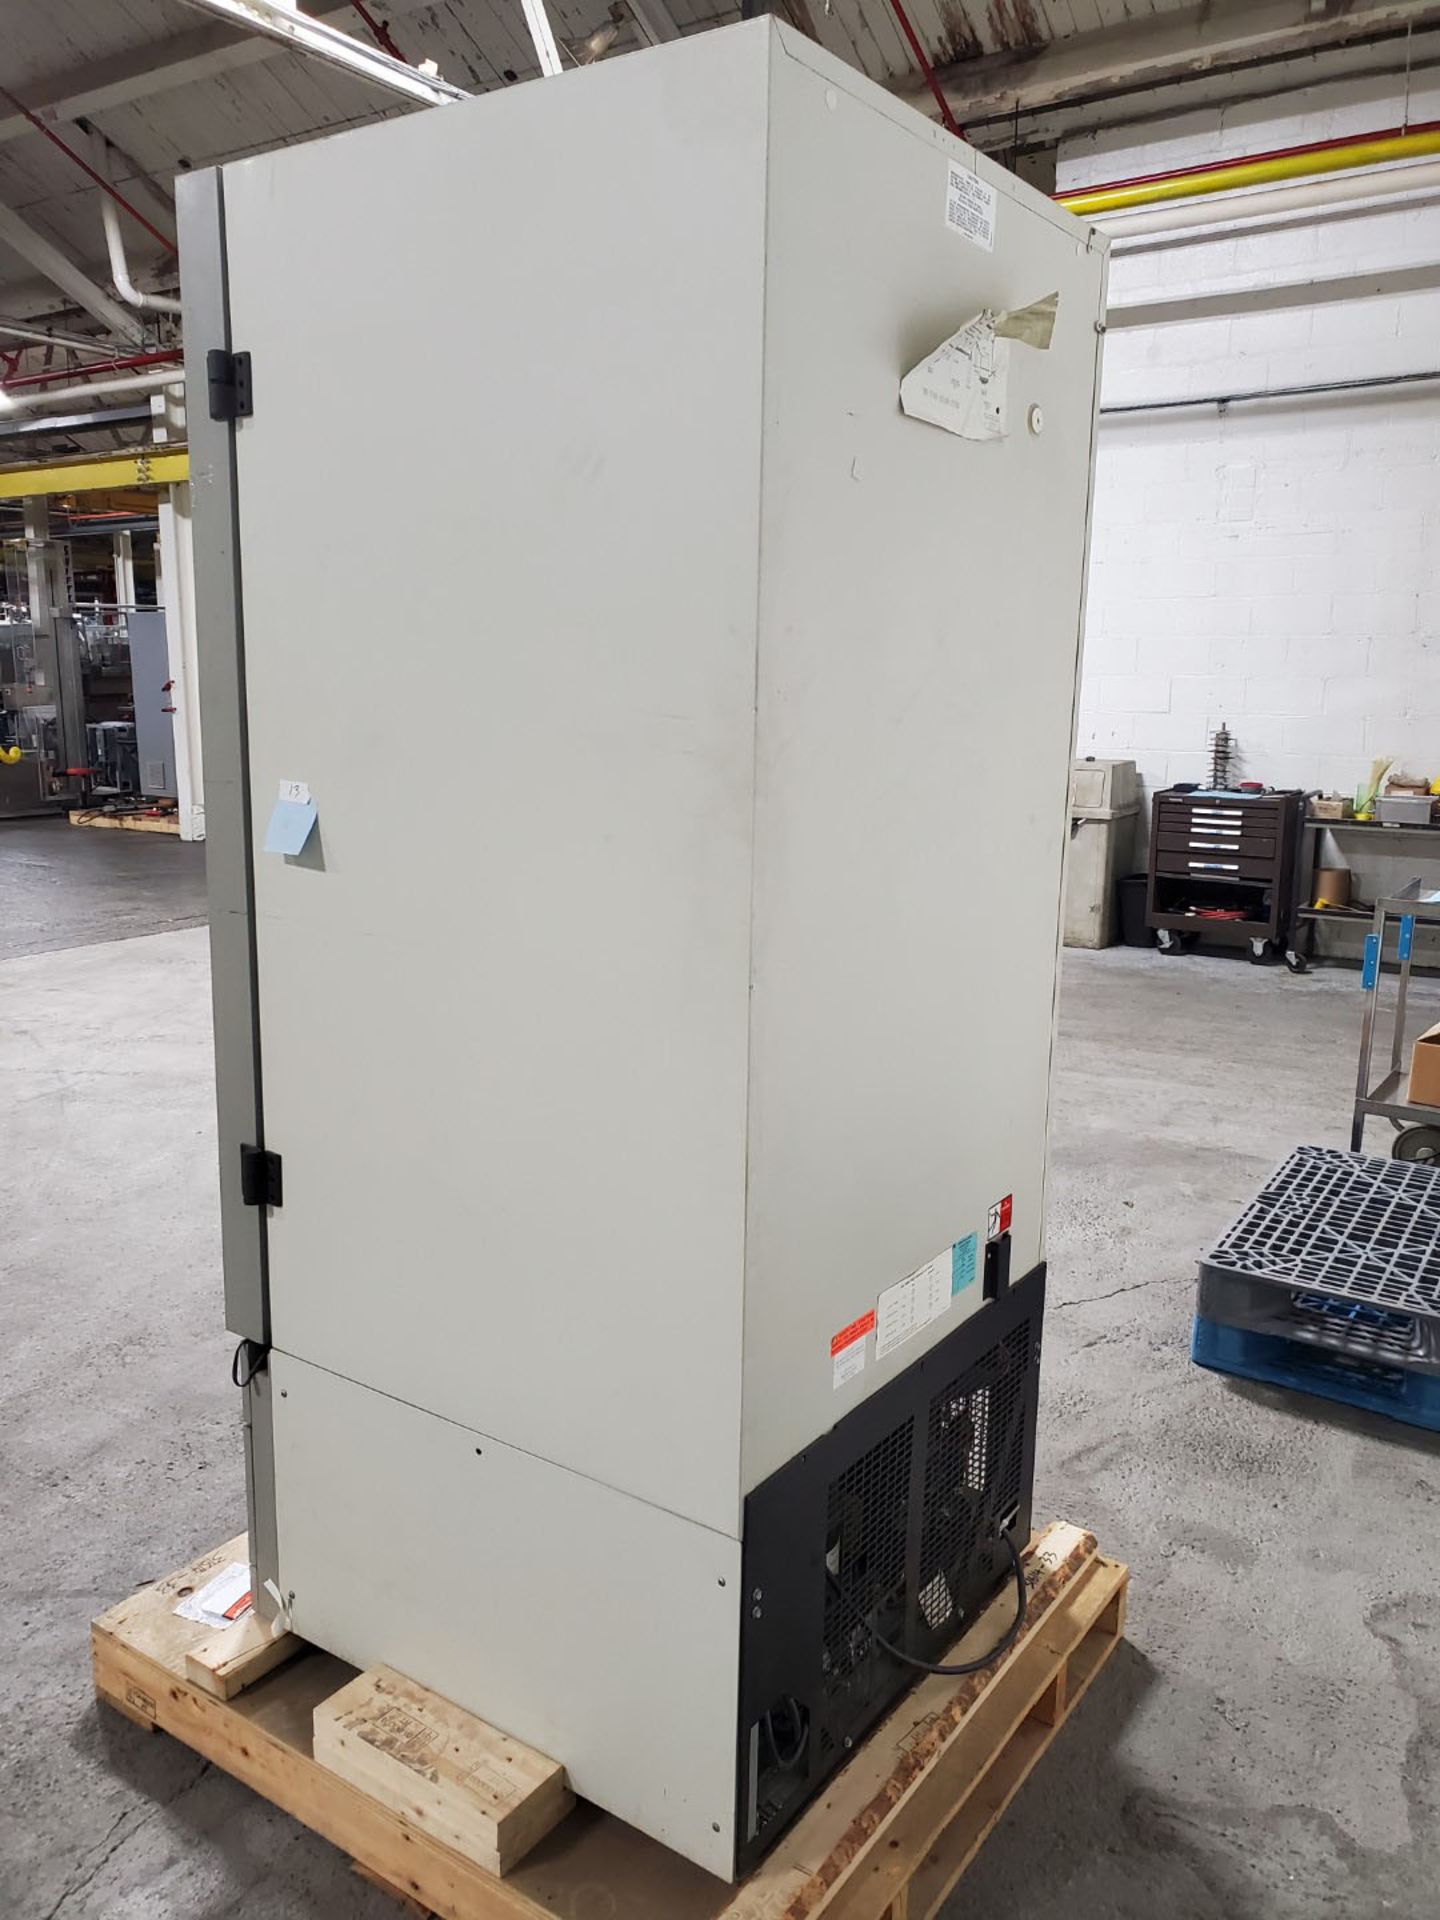 Revco Ultra Low Temperature Freezer, Model ULT1786-9-A14 - Image 3 of 6